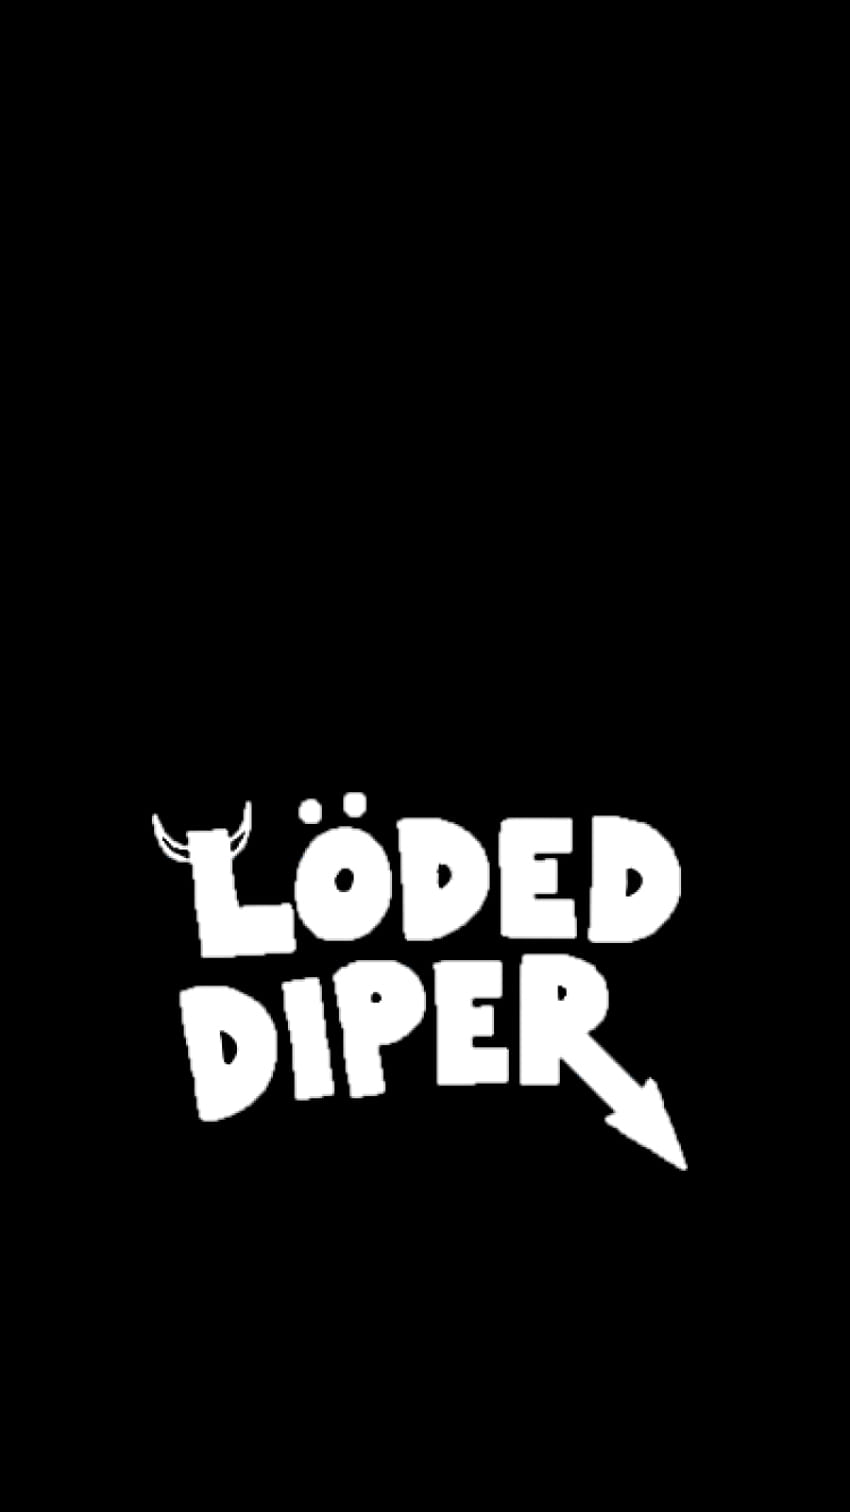 I made a minimalist Loded Diper for the iPhone 6, 7, and, minimalist 2280x1080 HD phone wallpaper